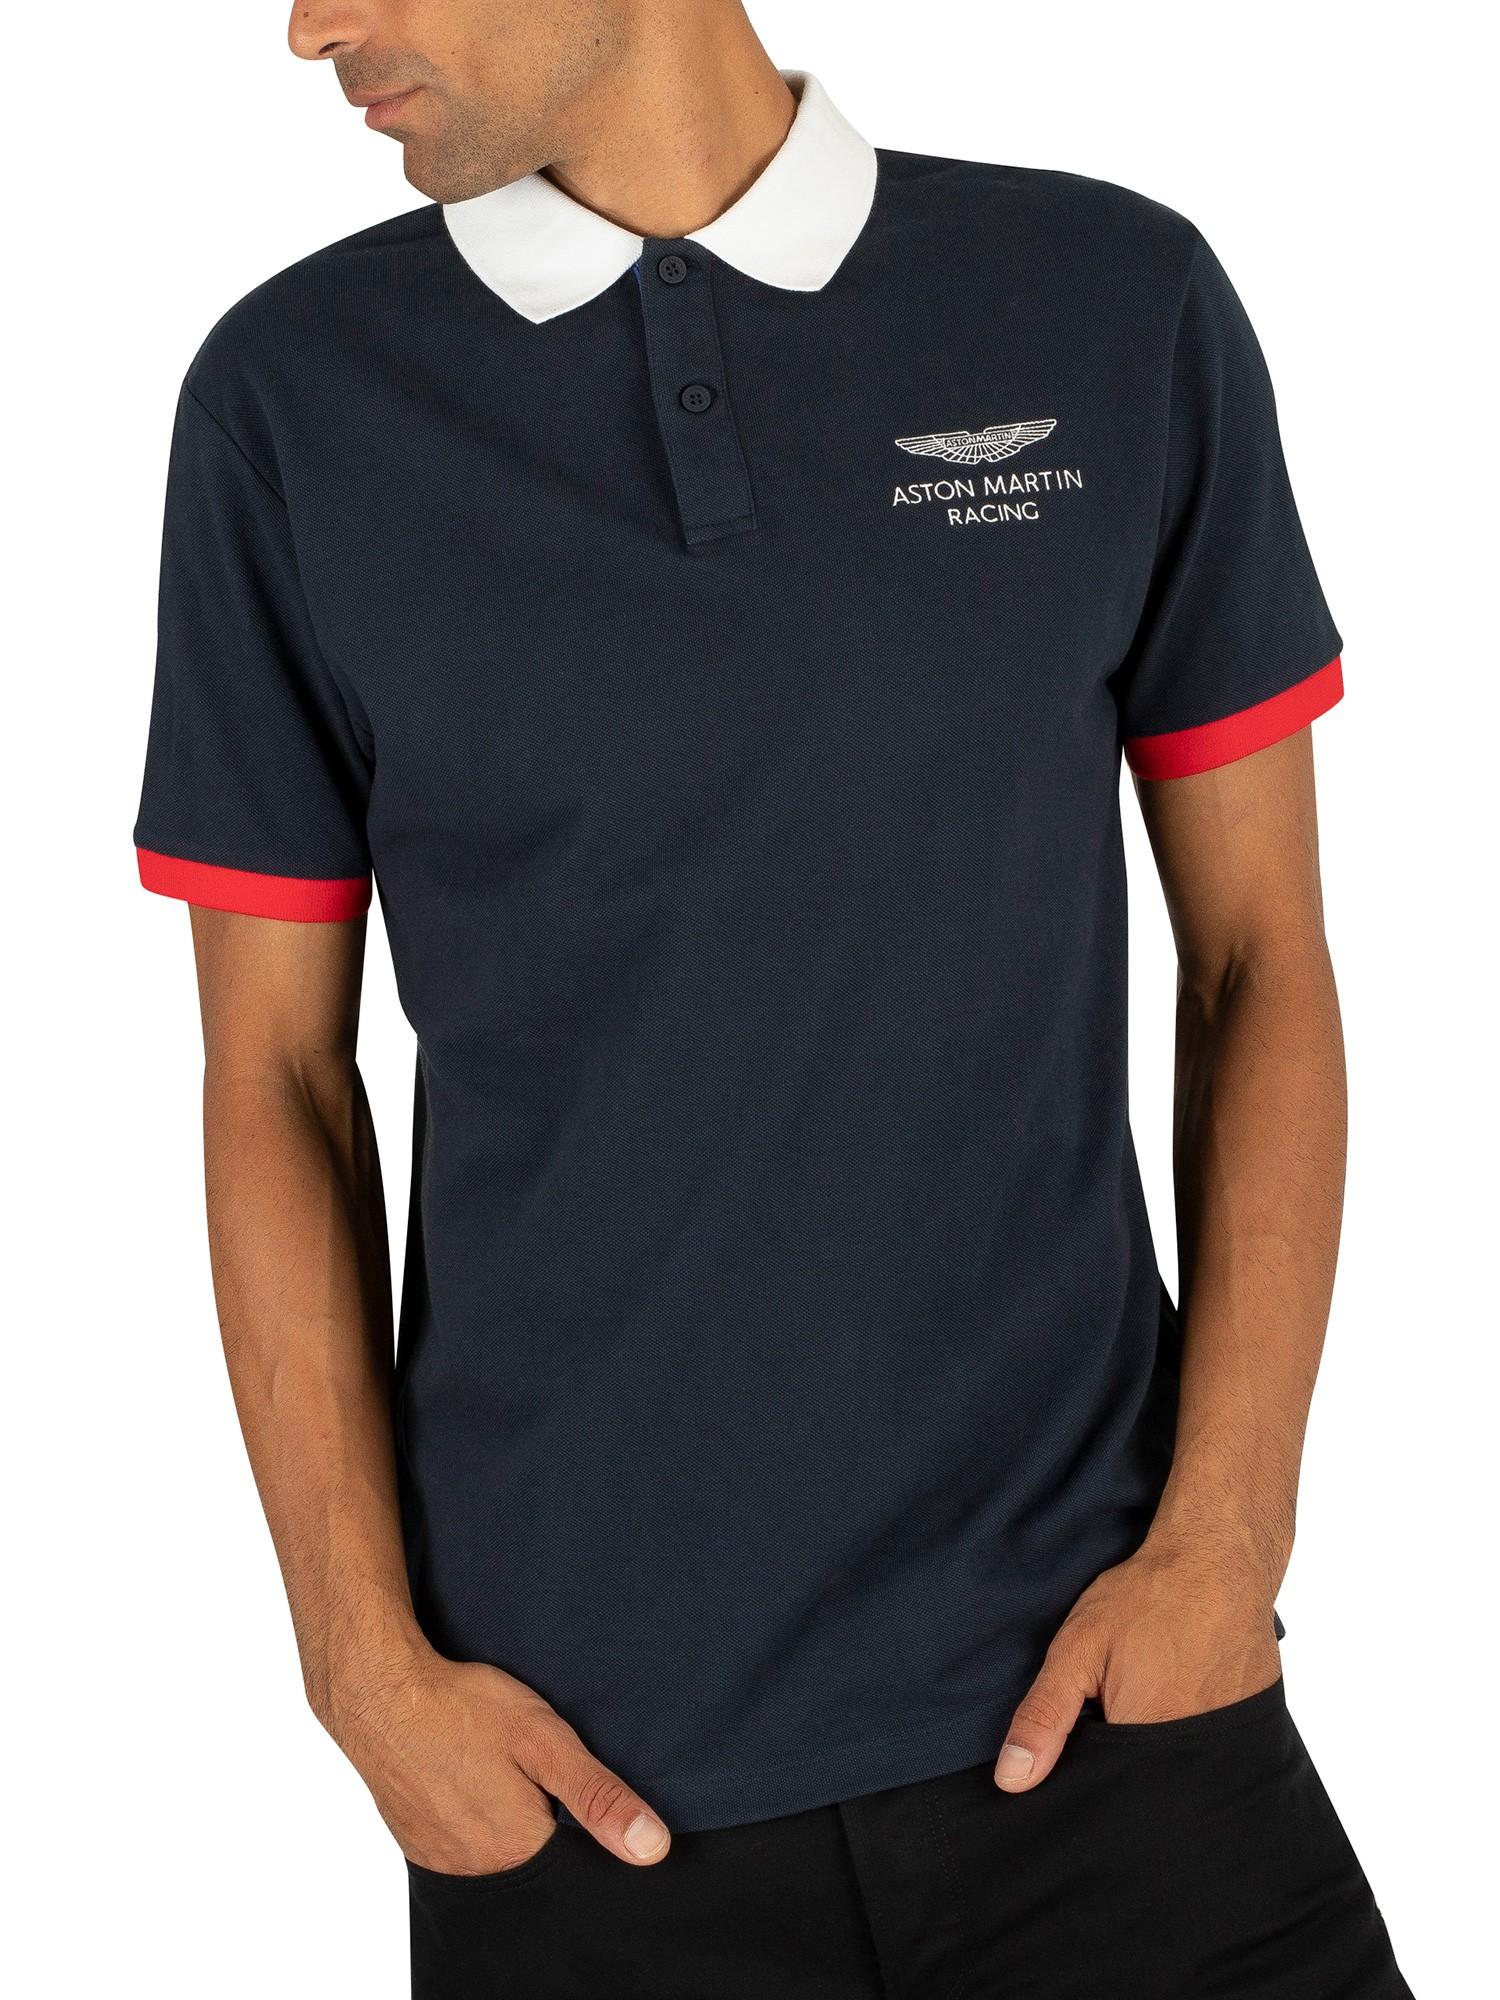 Hackett Cotton Amr Polo Shirt in Navy (Blue) for Men - Lyst